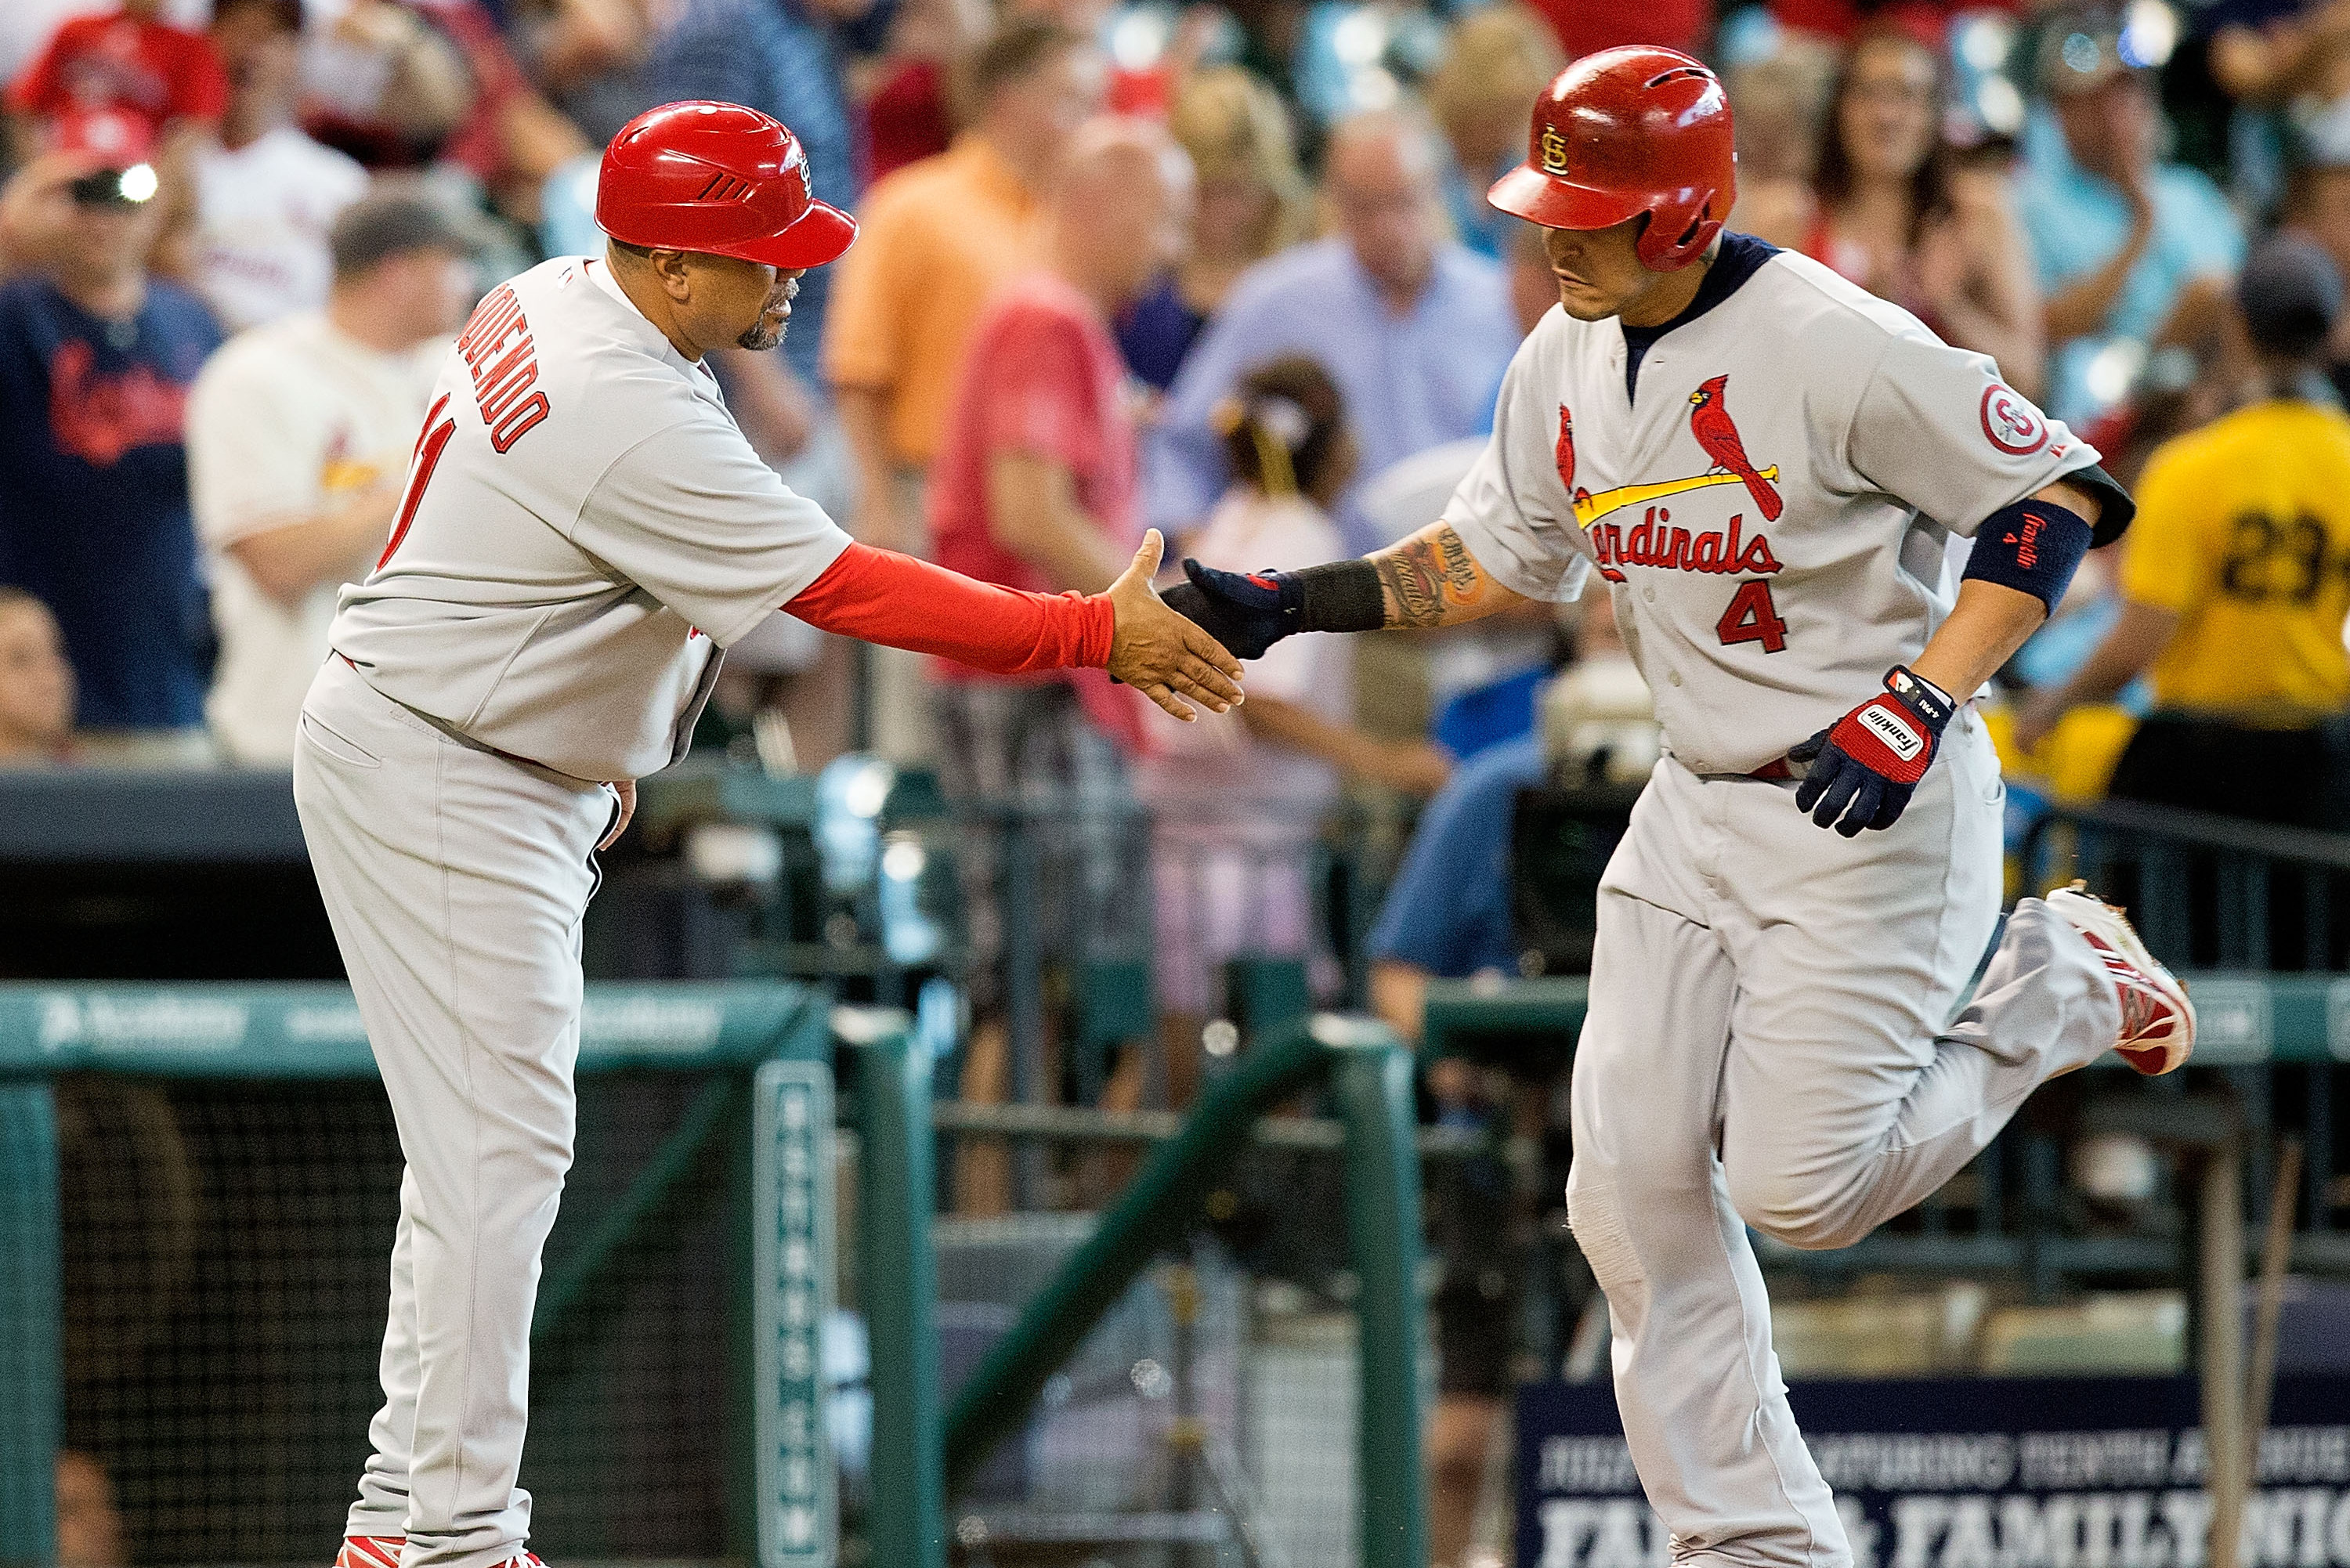 The mainstay': Yadier Molina outwitted, outworked opponents in legendary  Cardinals career